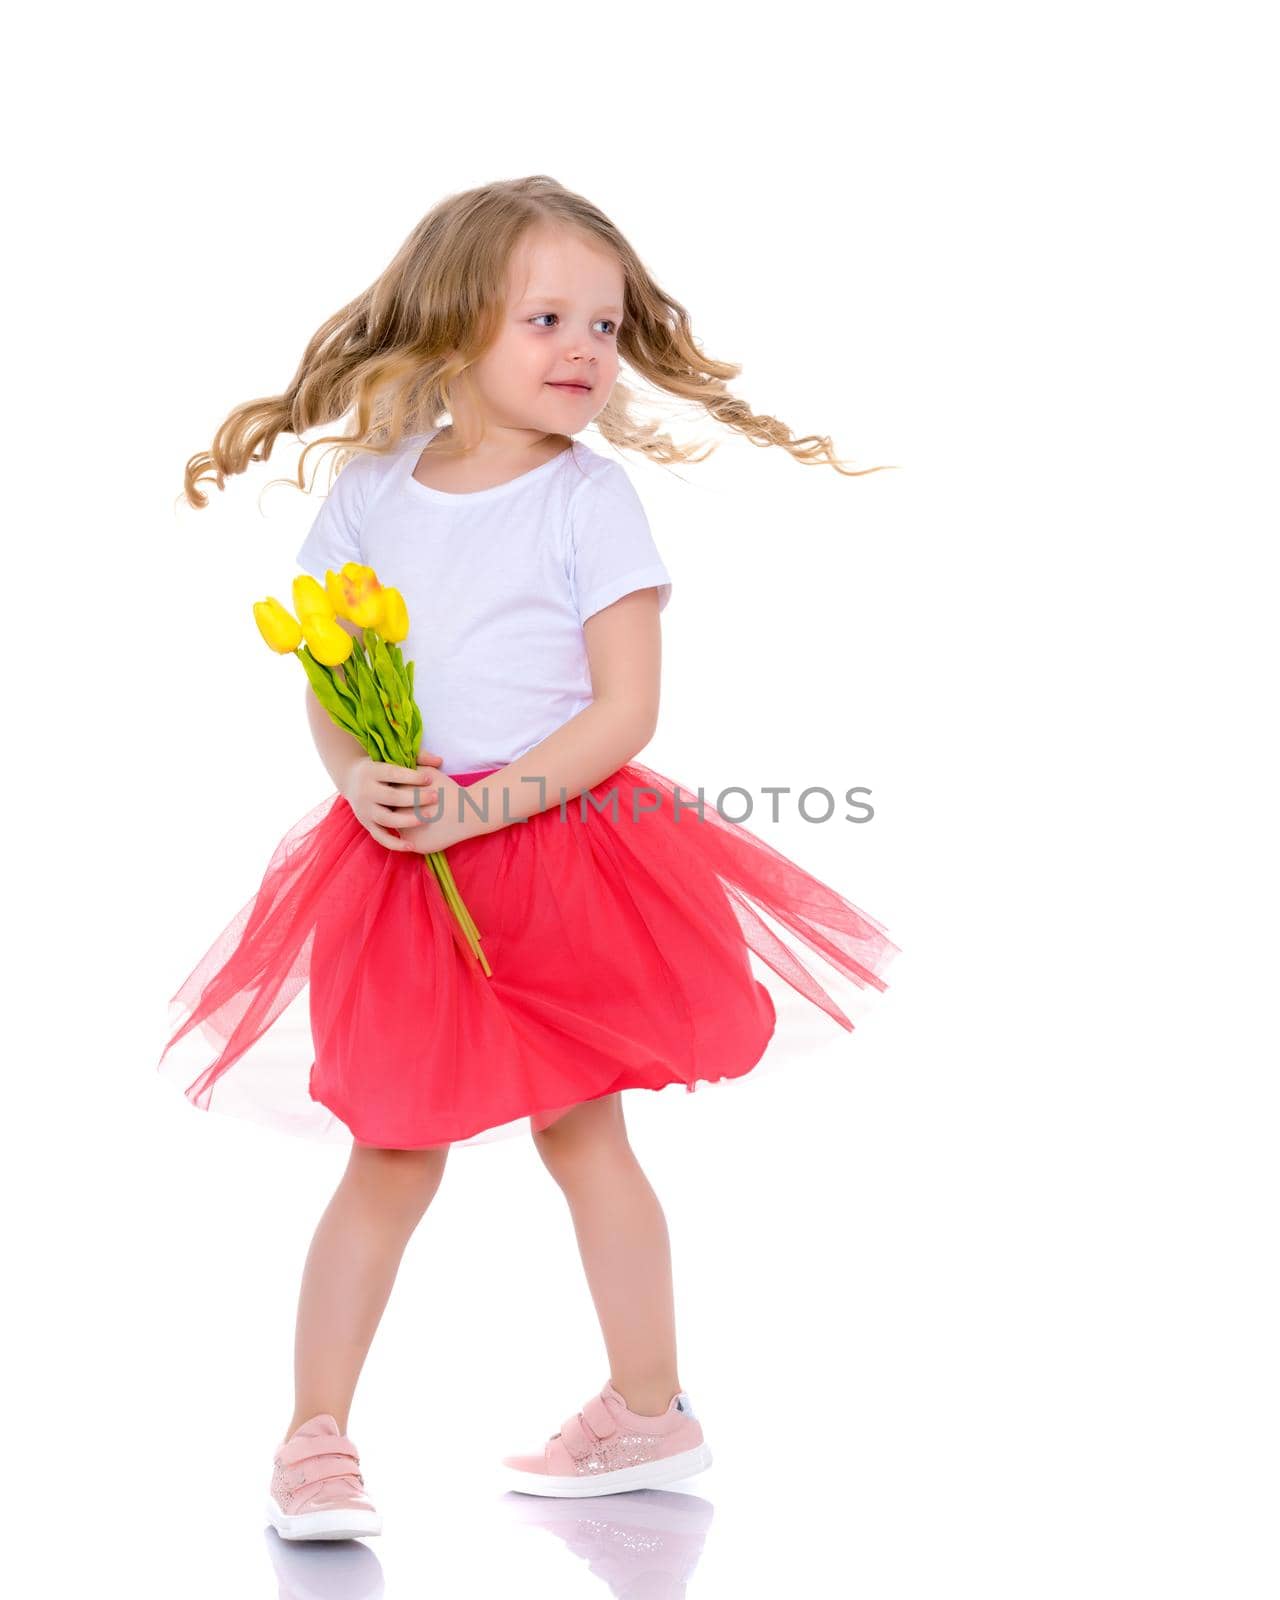 Little girl with a bouquet of tulips. by kolesnikov_studio